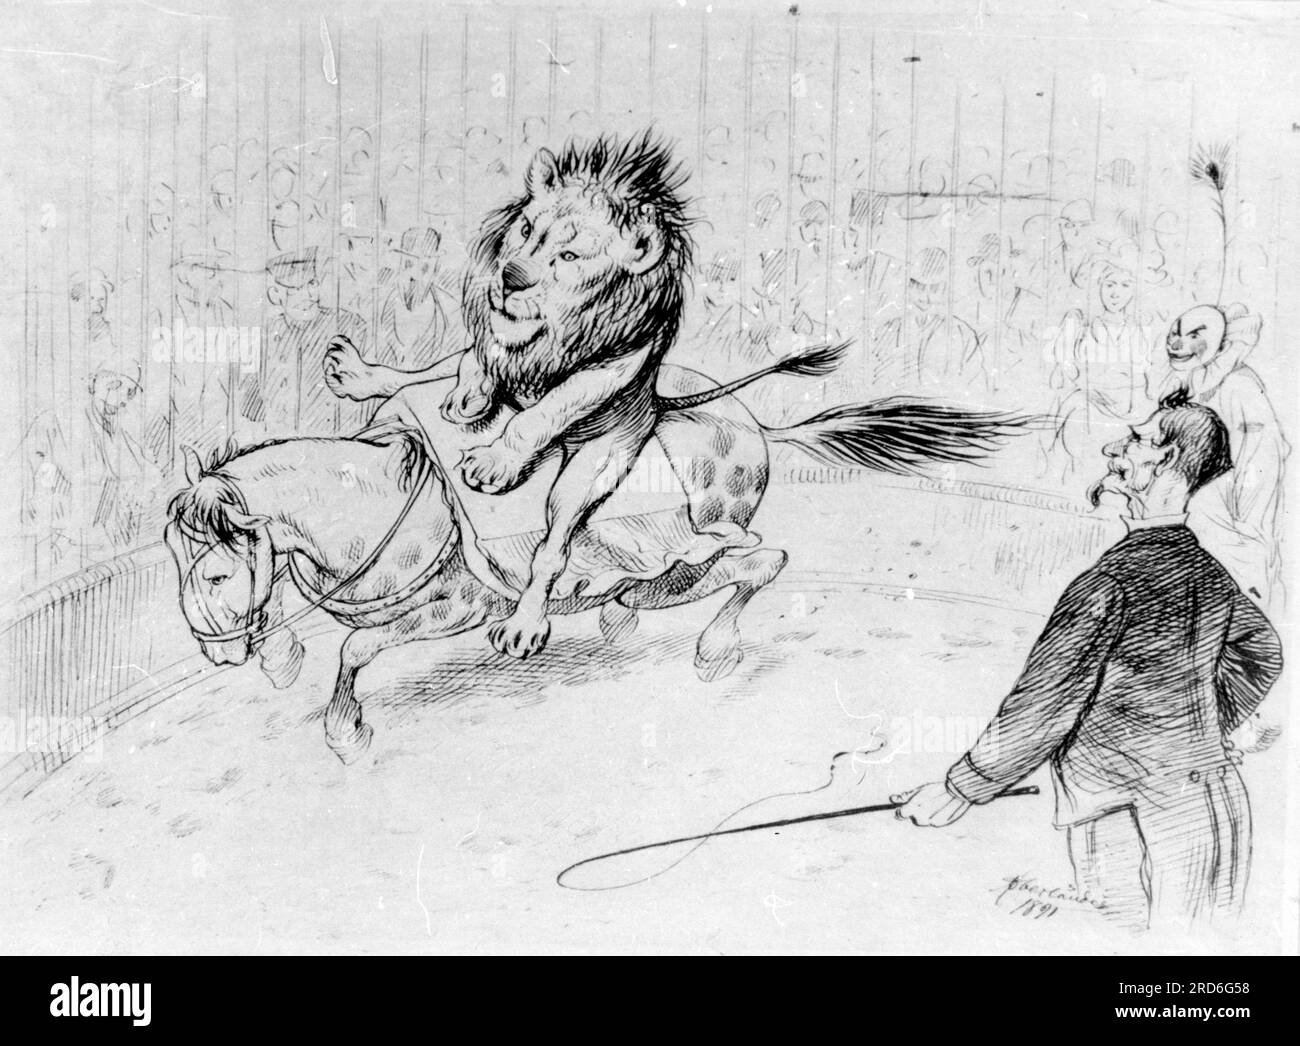 circus, dressage, lion riding on horse, drawing, by Adolf Oberlaender (1845 - 1923), 1891, ADDITIONAL-RIGHTS-CLEARANCE-INFO-NOT-AVAILABLE Stock Photo